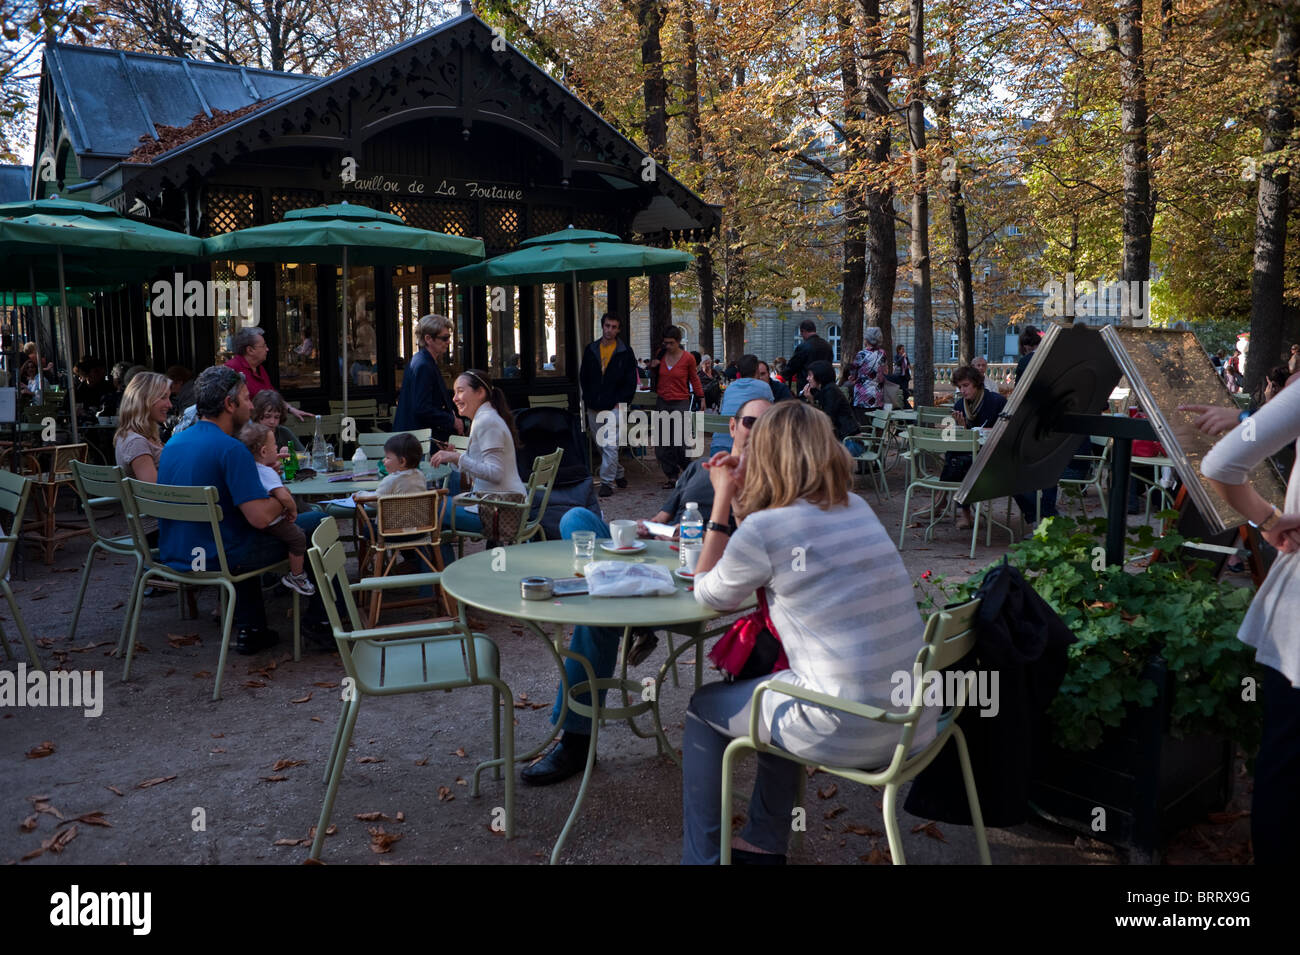 Paris, Cafe, France, Large Crowd People in Luxembourg Gardens, Urban Park, 'Jardin du Luxembourg', People Sharing Coffee in Outdoor Terrace, coffee shop, french cafe exterior Stock Photo